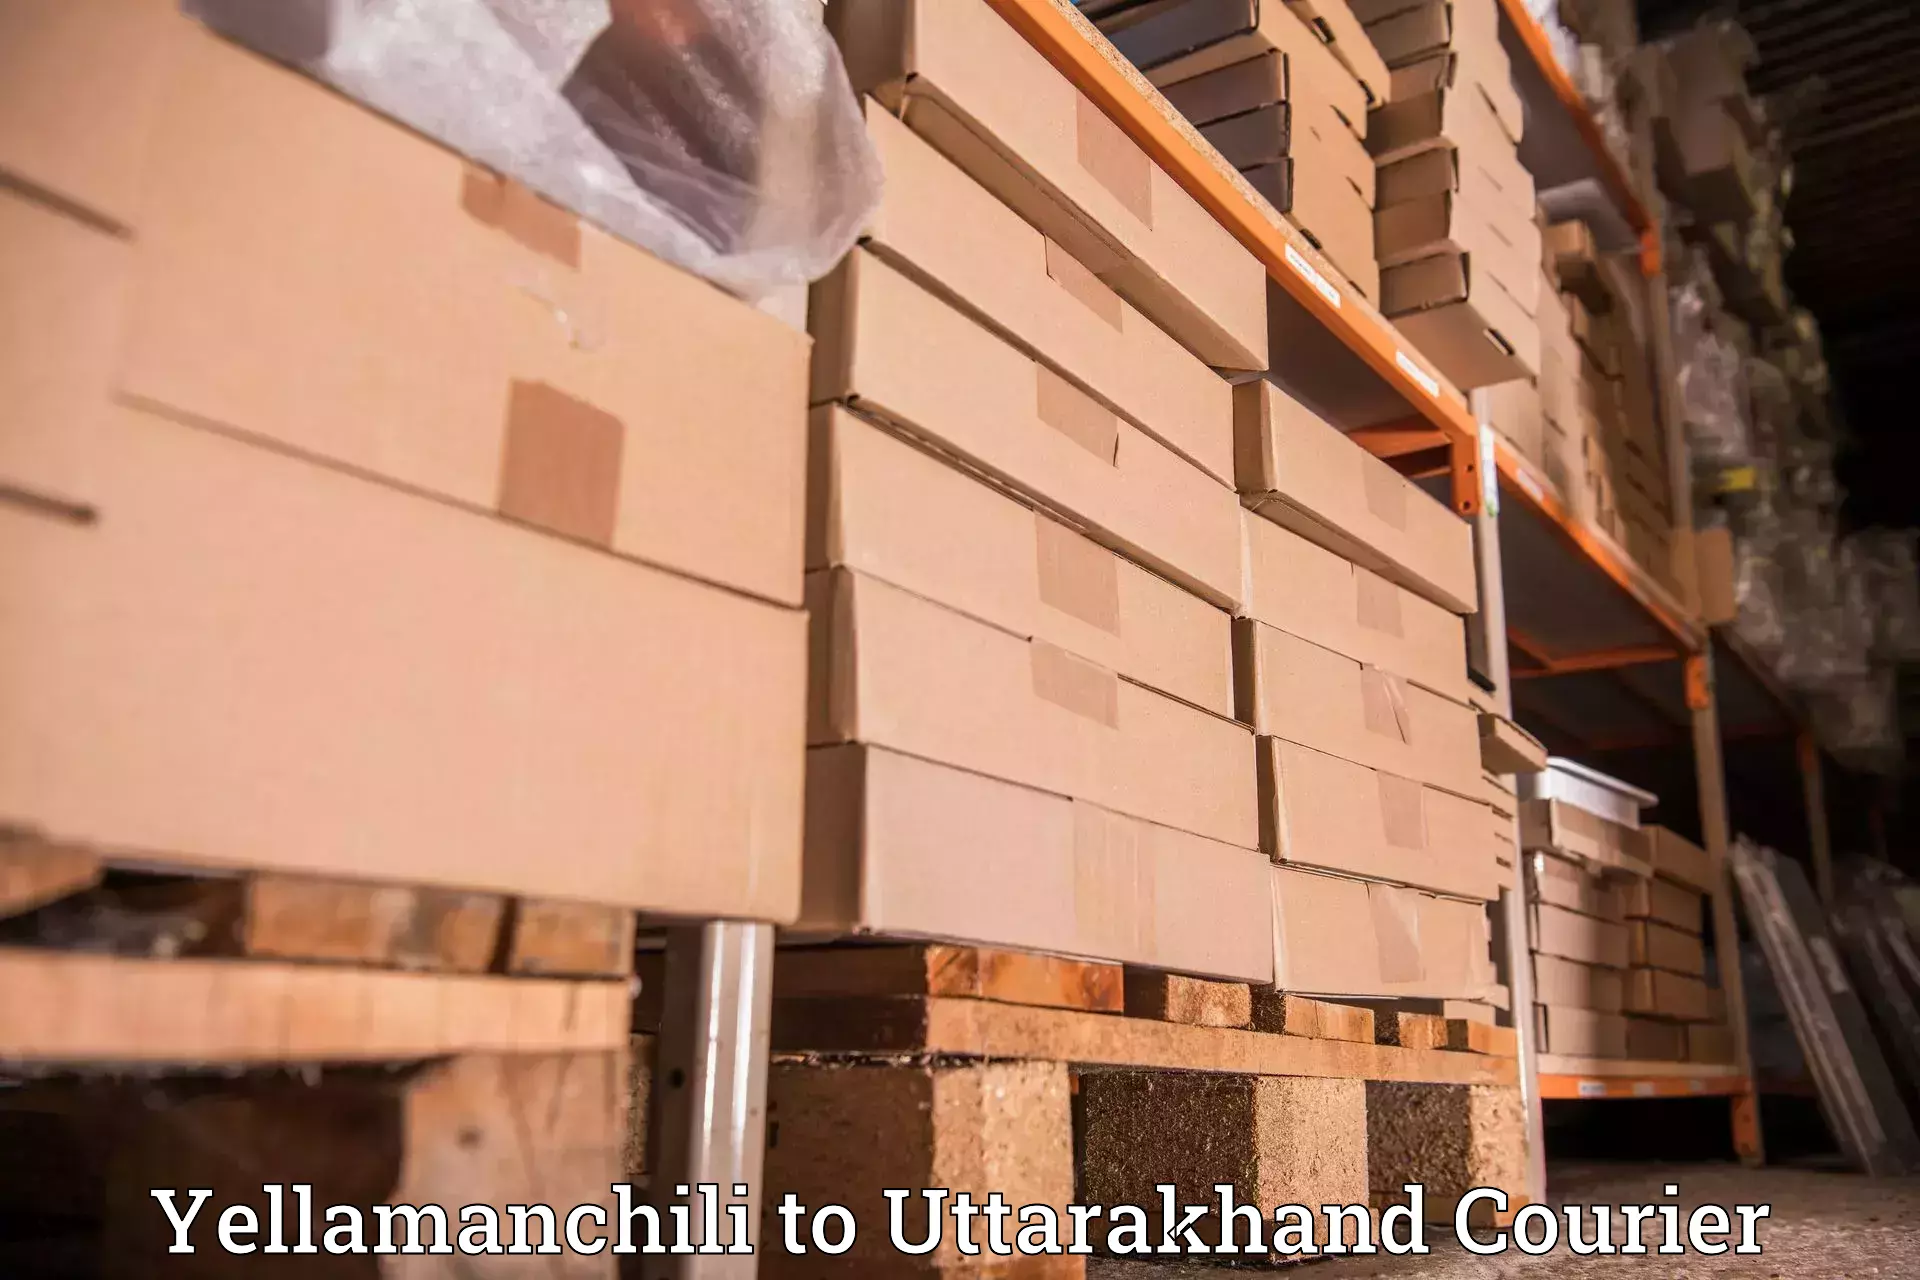 State-of-the-art courier technology Yellamanchili to Bageshwar